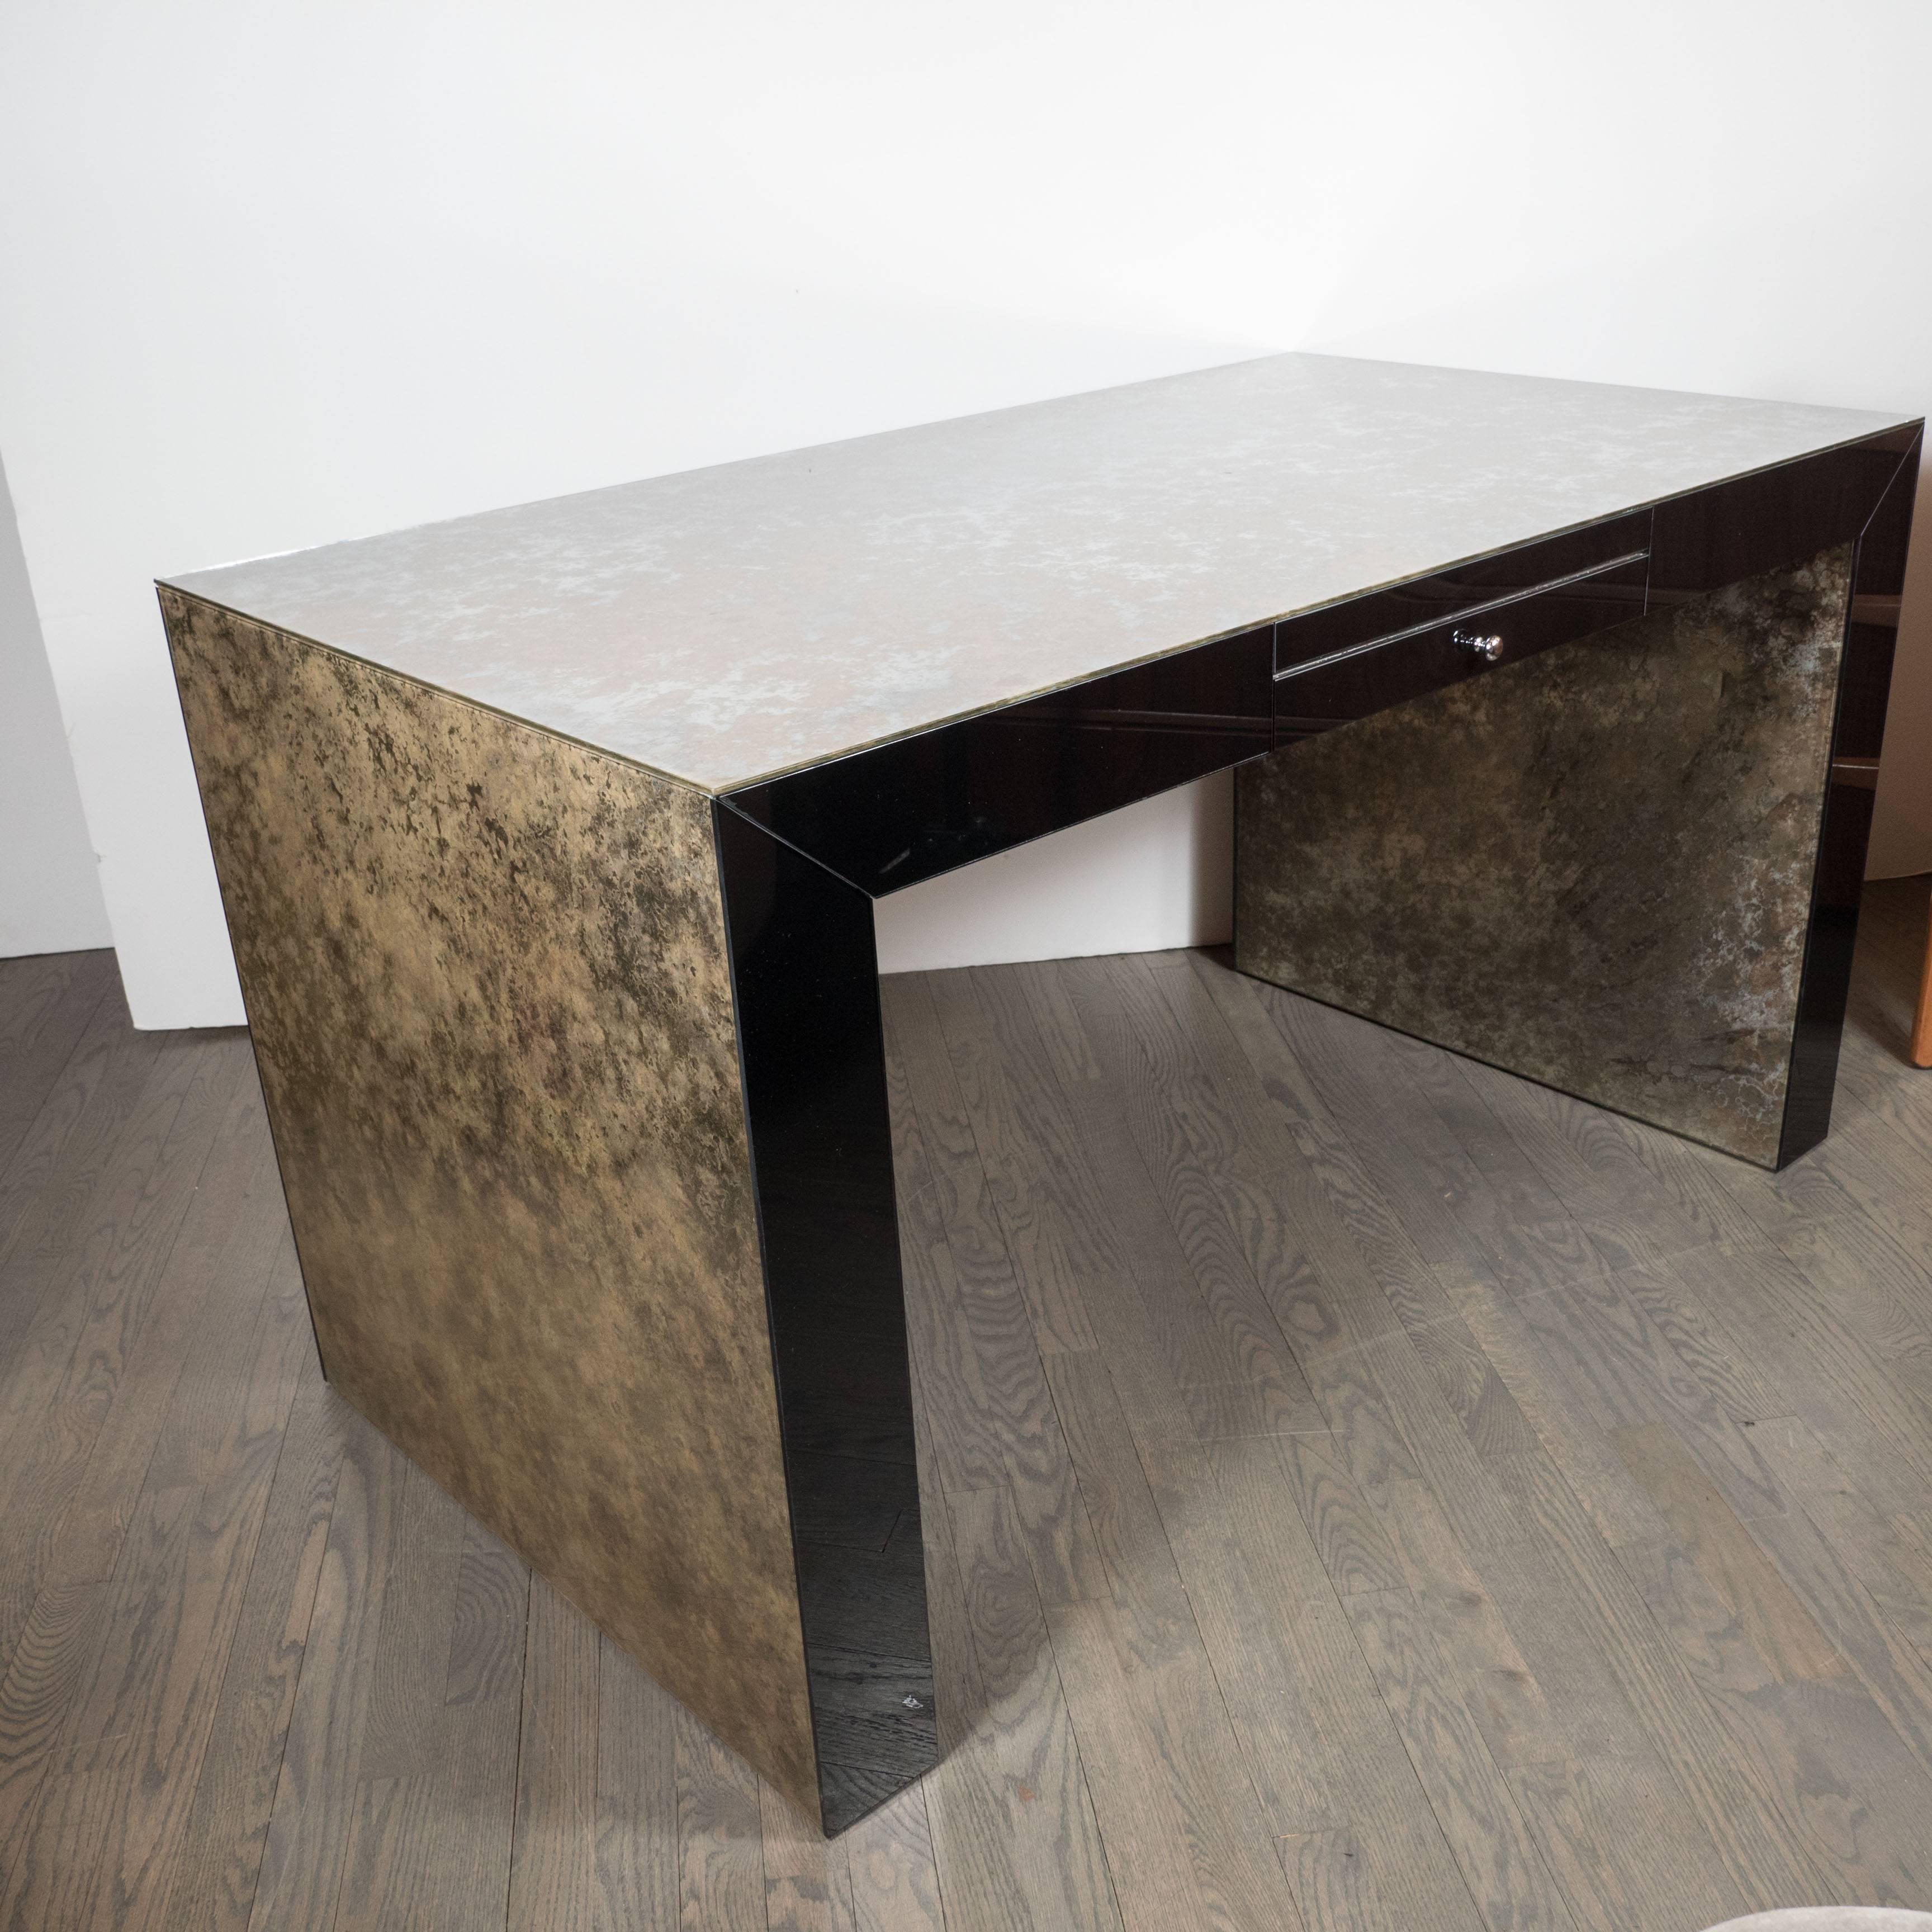 This very clean and modernist Parsons style desk is made of gorgeous antique mirror with borders of black vitrolite. The top and sides of this piece feature a stunning highly spotted and smokey antique mirror while the front and back of the desk are